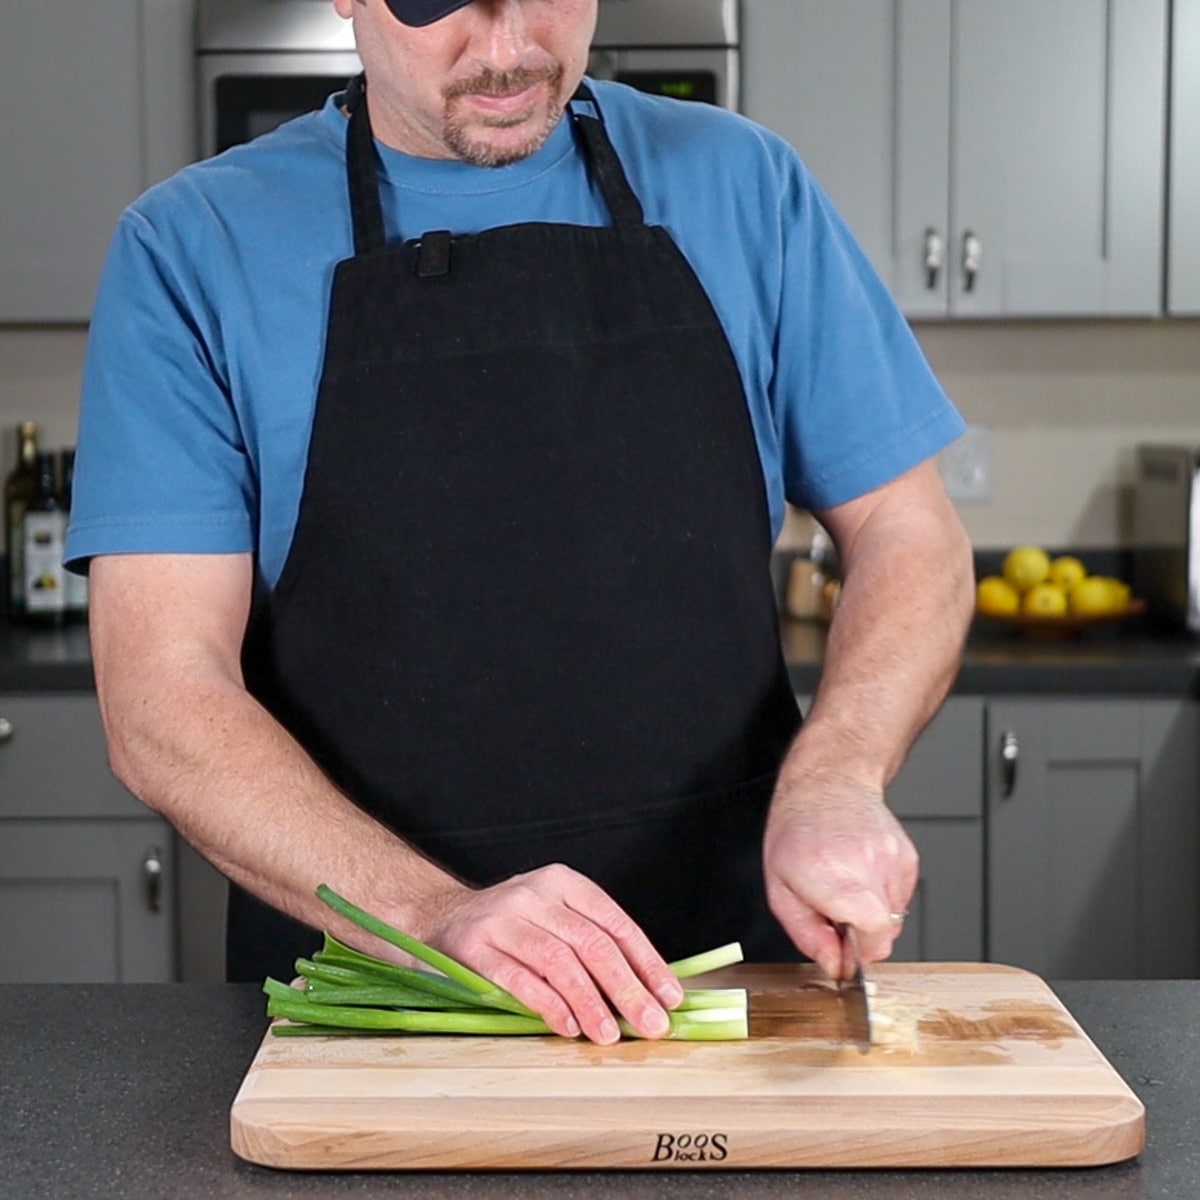 cutting the ends of a green onion
